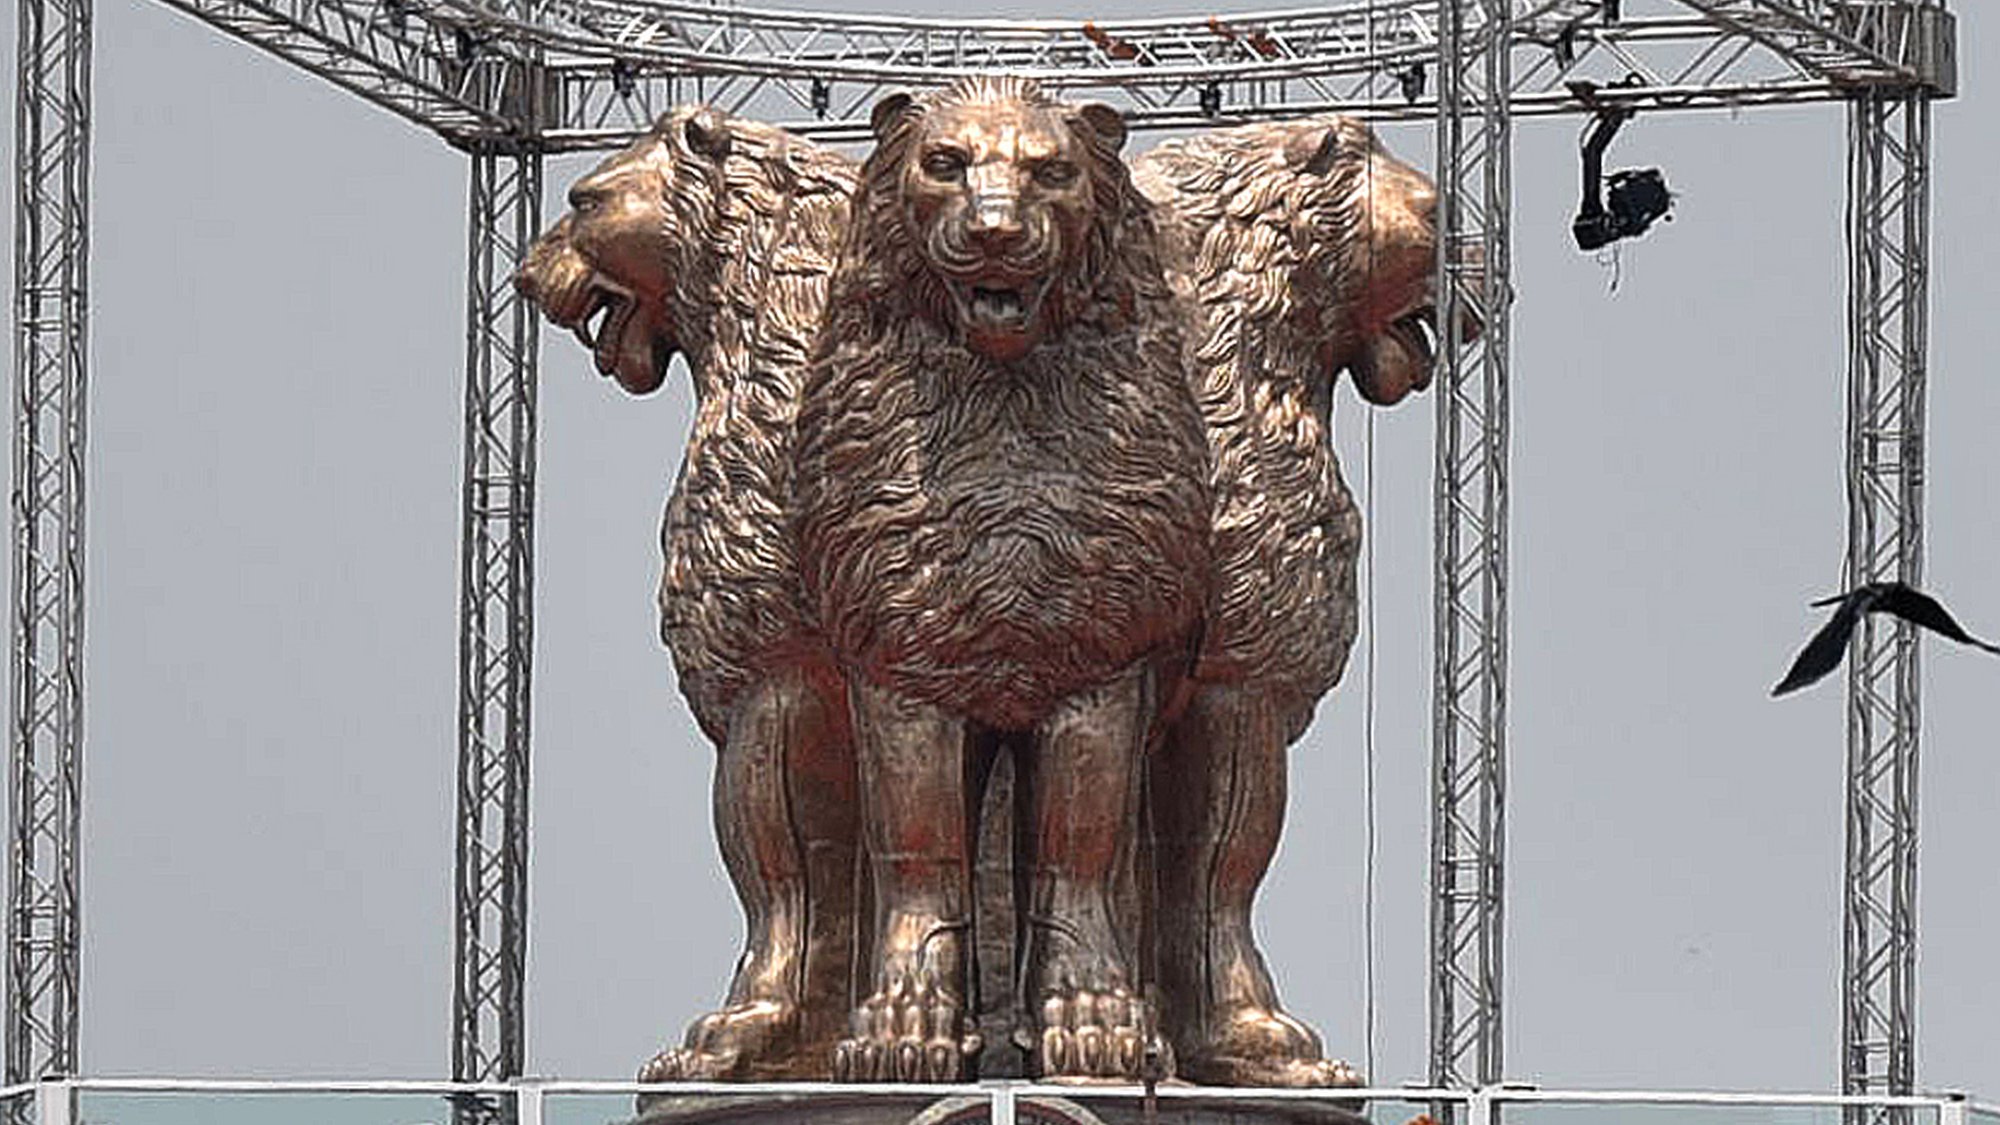 National emblem: India rejects criticism over 'snarling' lion statue - BBC  News